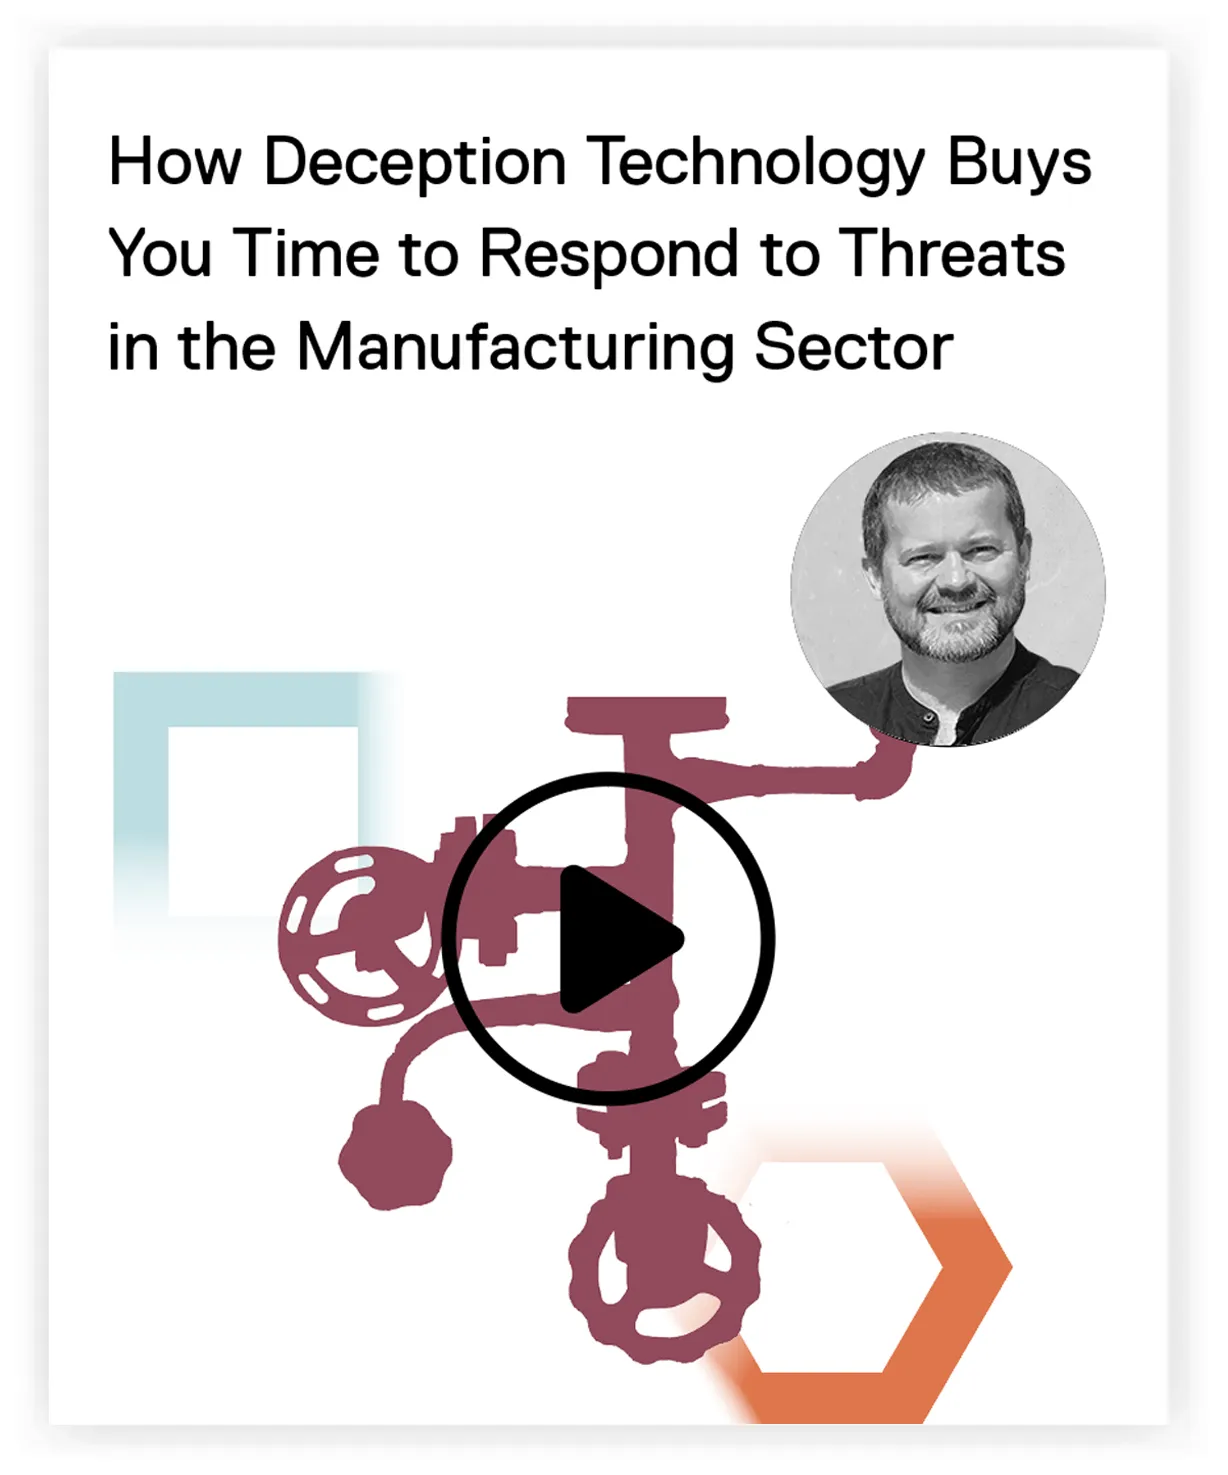 How deception technology buys you time to respond to threats in the manufacturing sector?